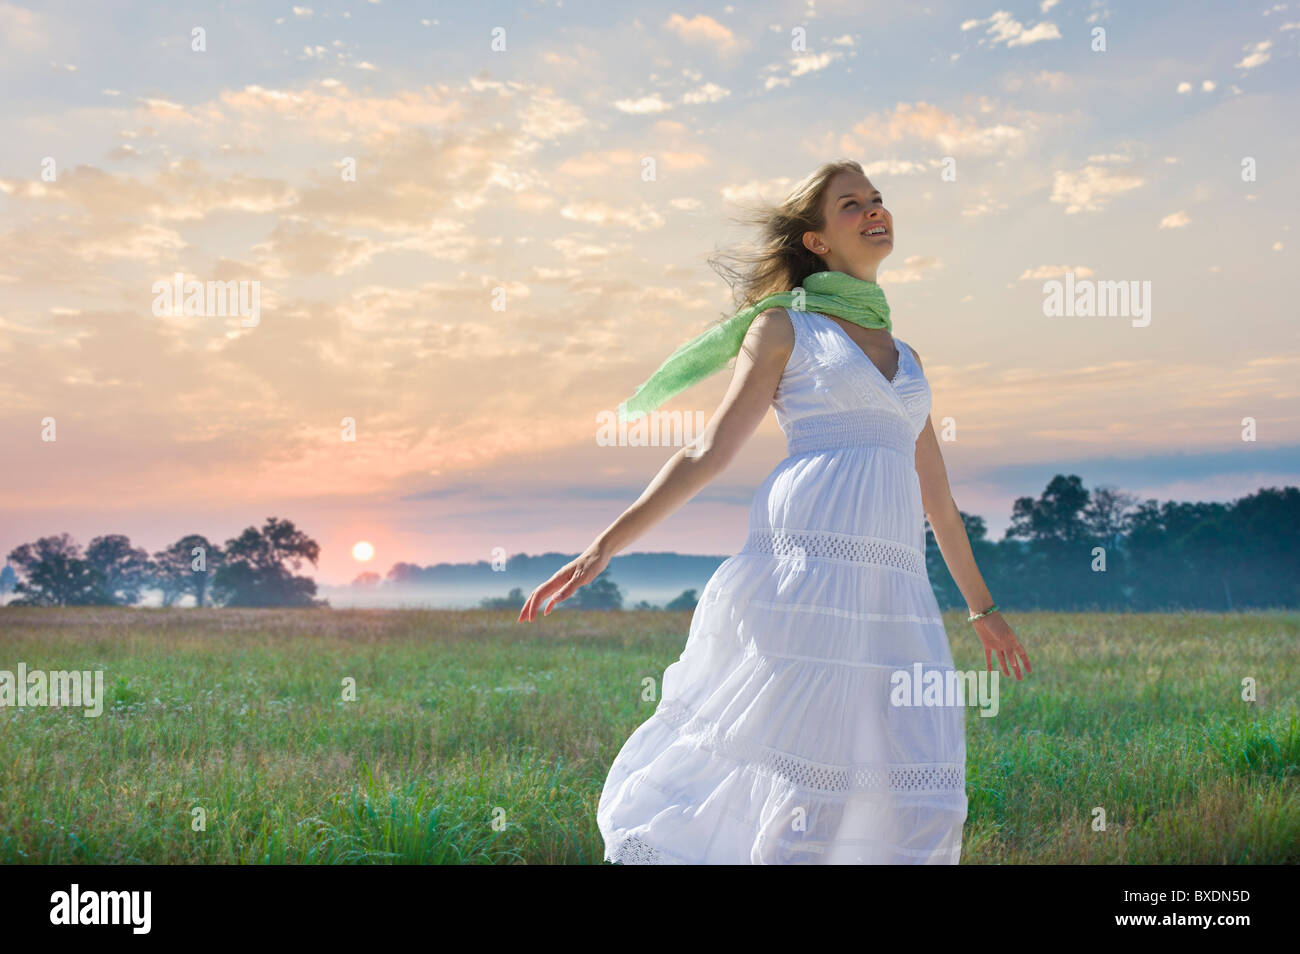 Carefree woman in field Banque D'Images